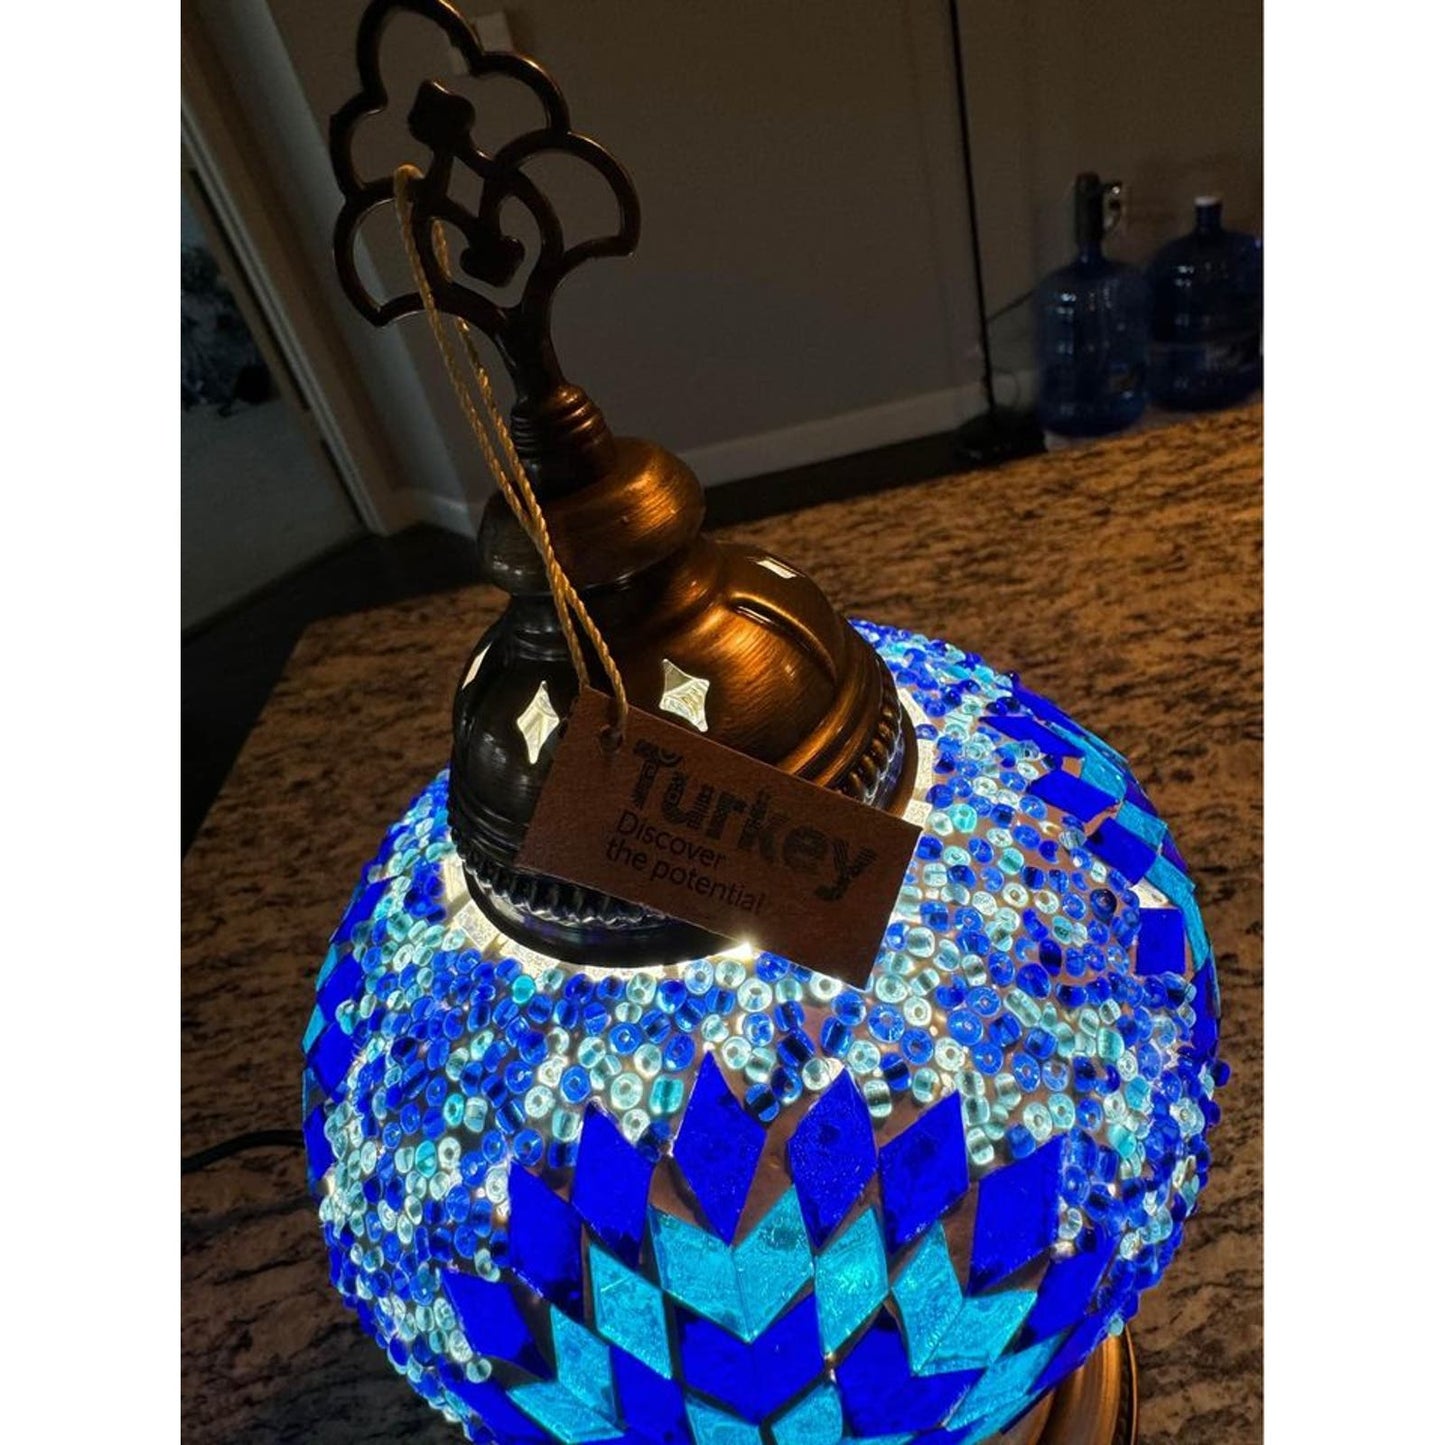 Handmade mosaic lamp, blue and turquoise glass